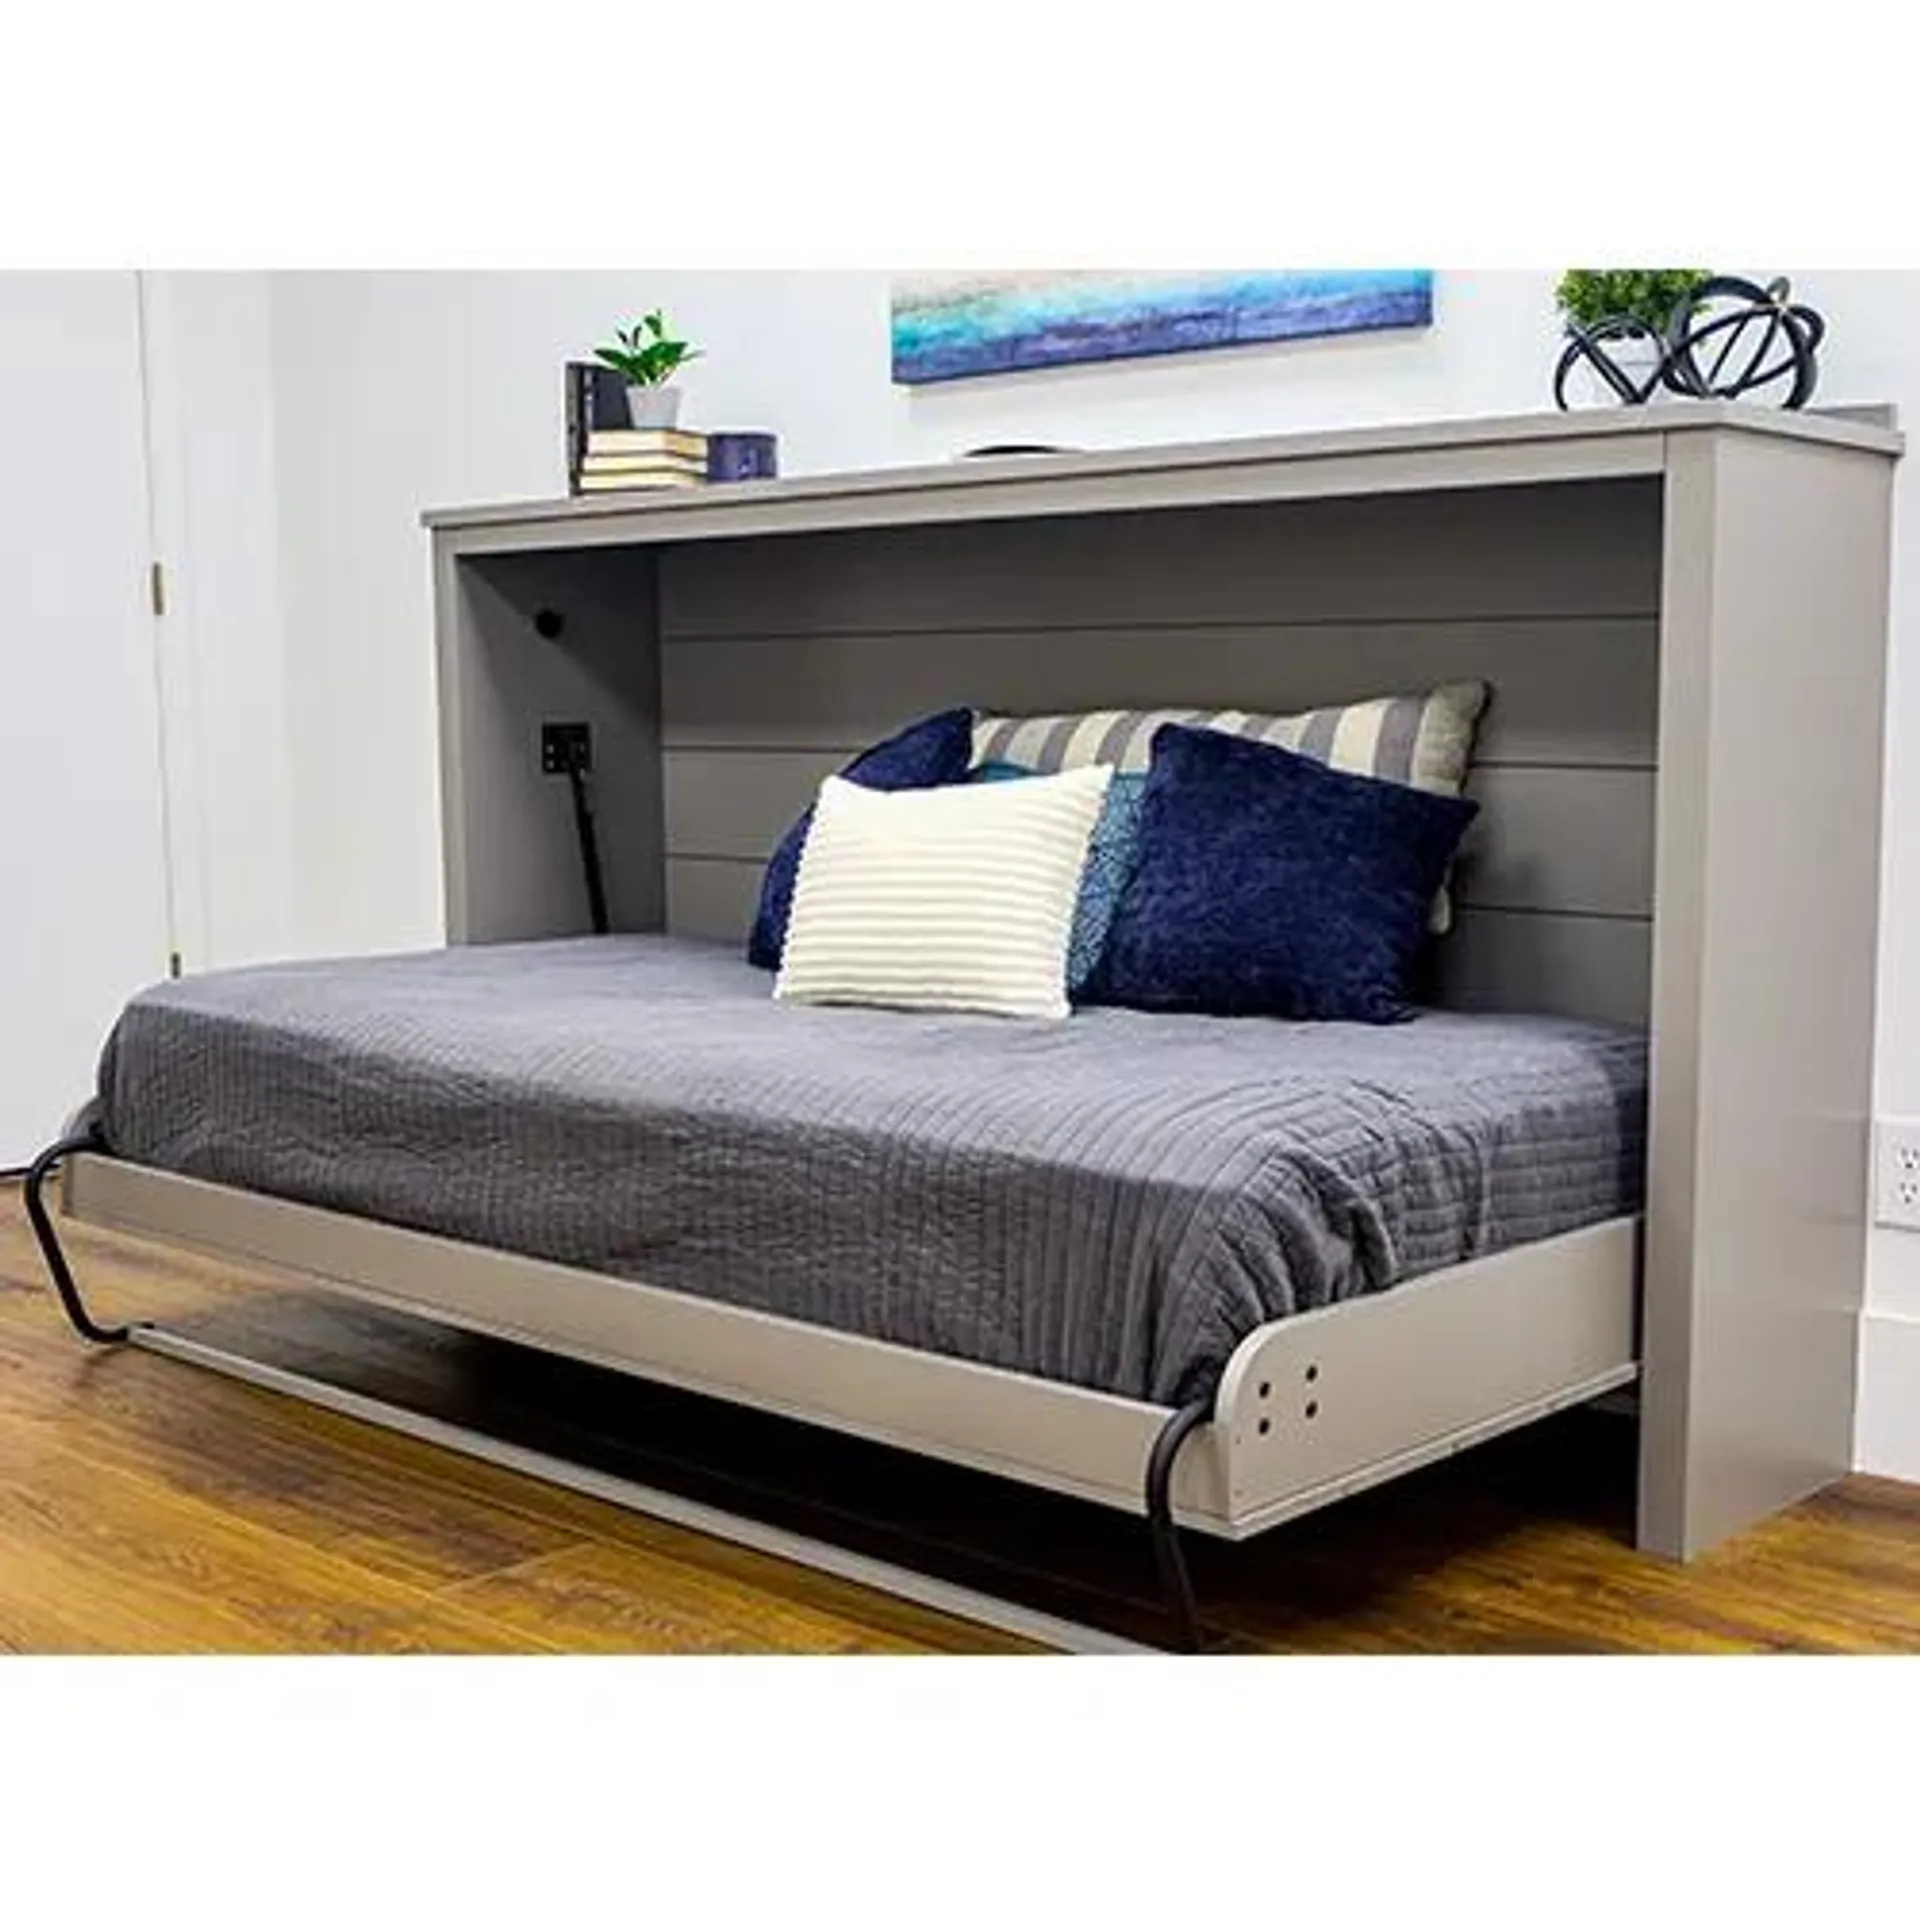 Create-A-Bed Twin Horizontal Adjustable Deluxe Murphy Bed Kit